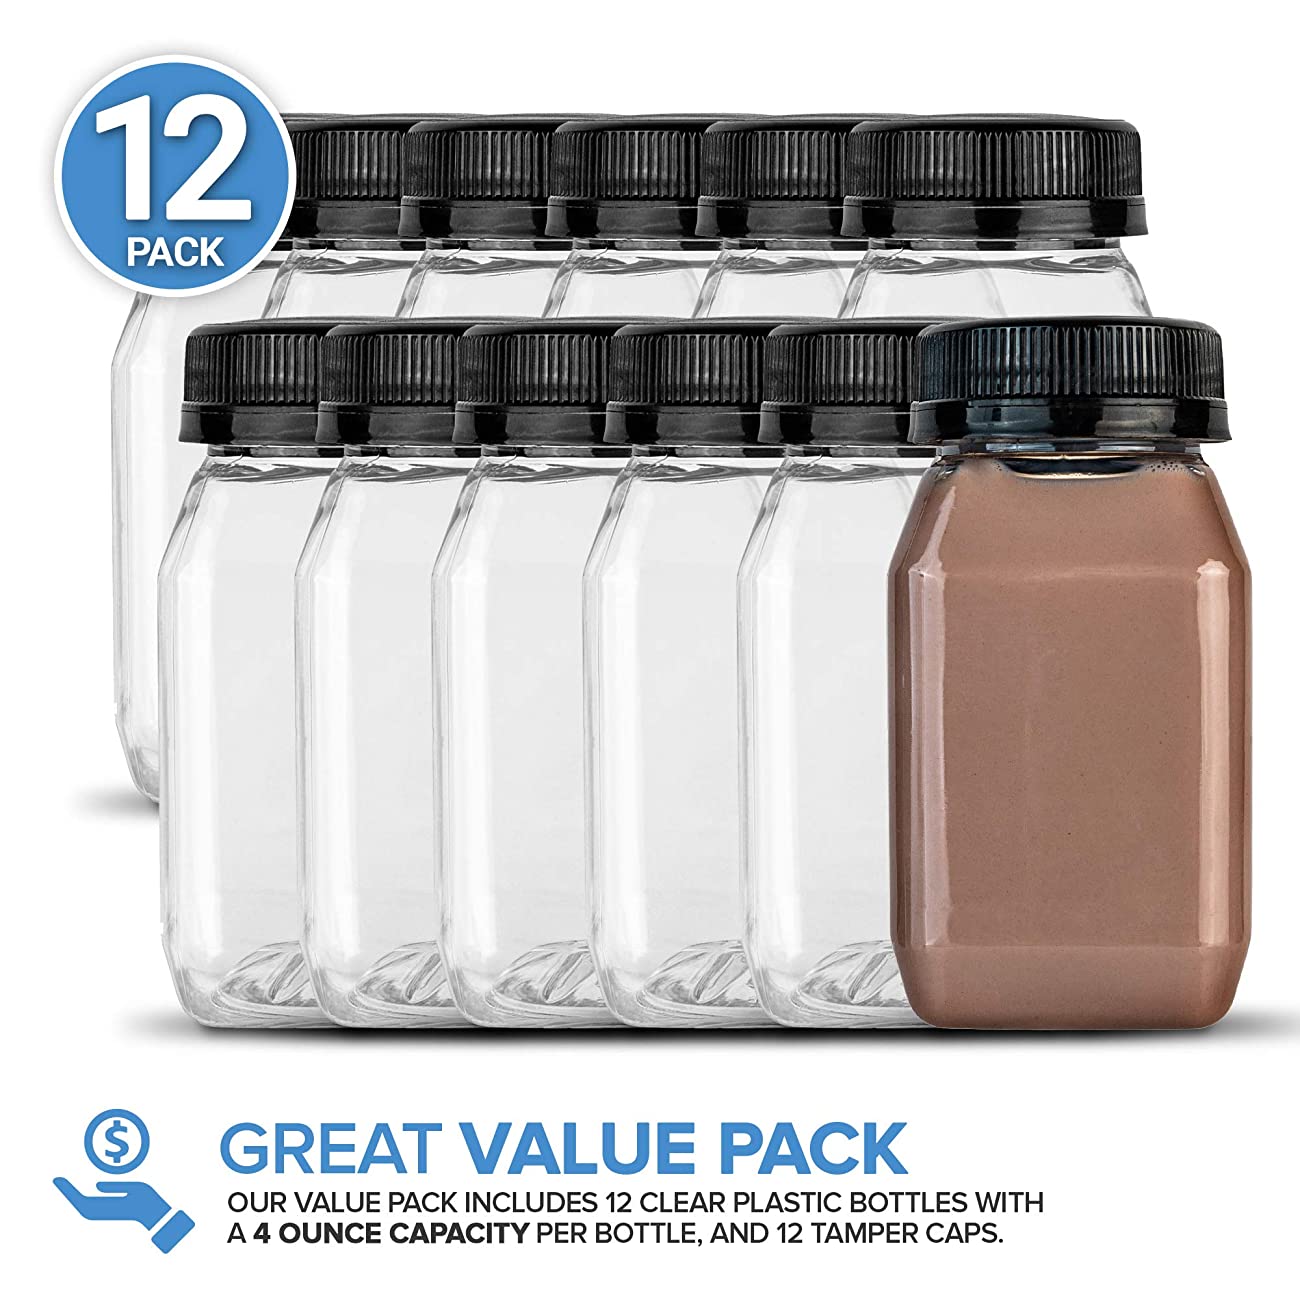 12oz Reusable Clear Plastic Juice Bottles with Caps, 12 Pack, by